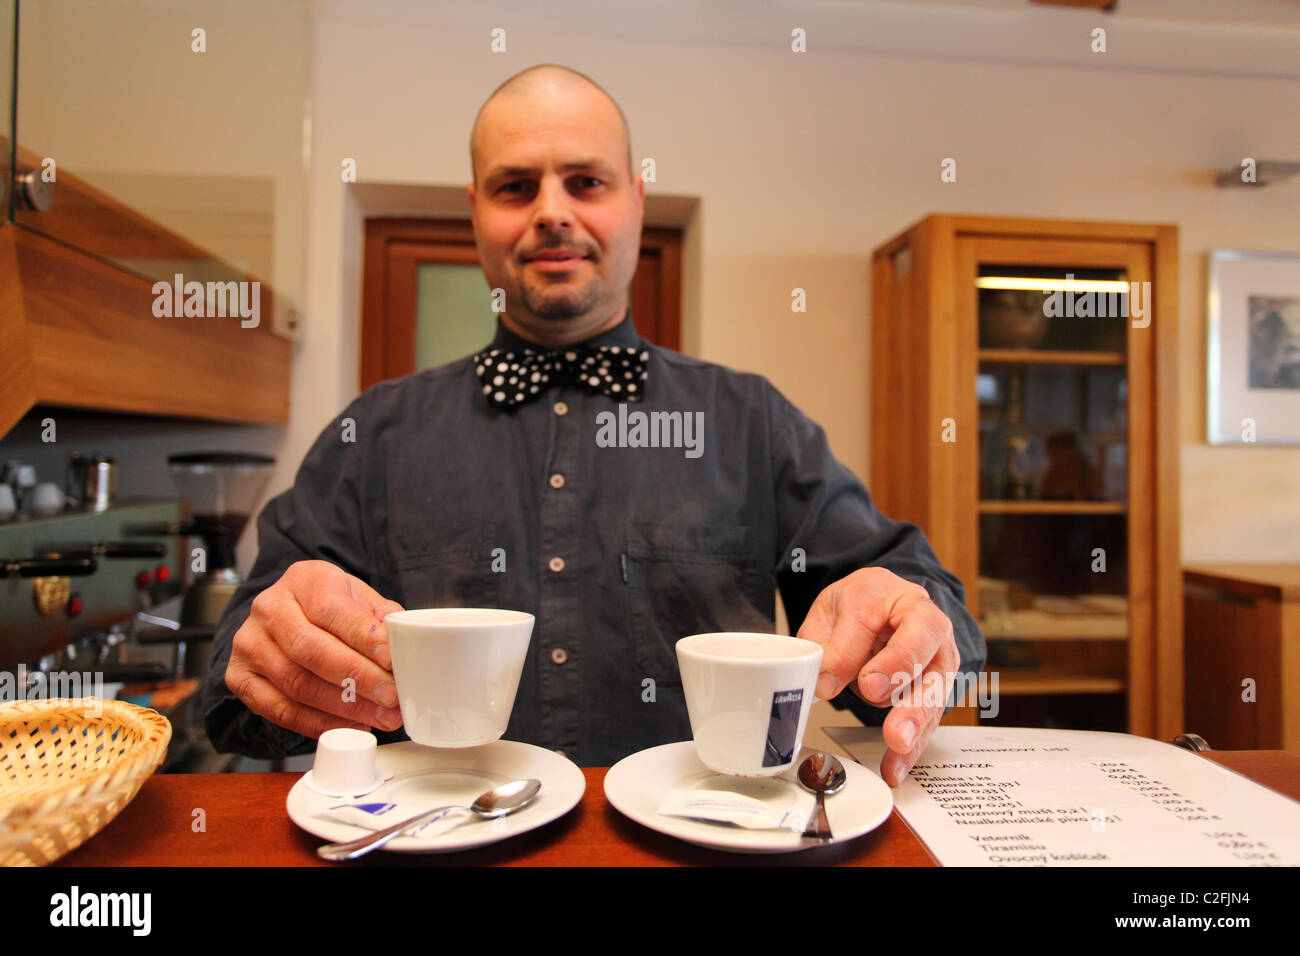 Barista serving two cups of espresso. Stock Photo